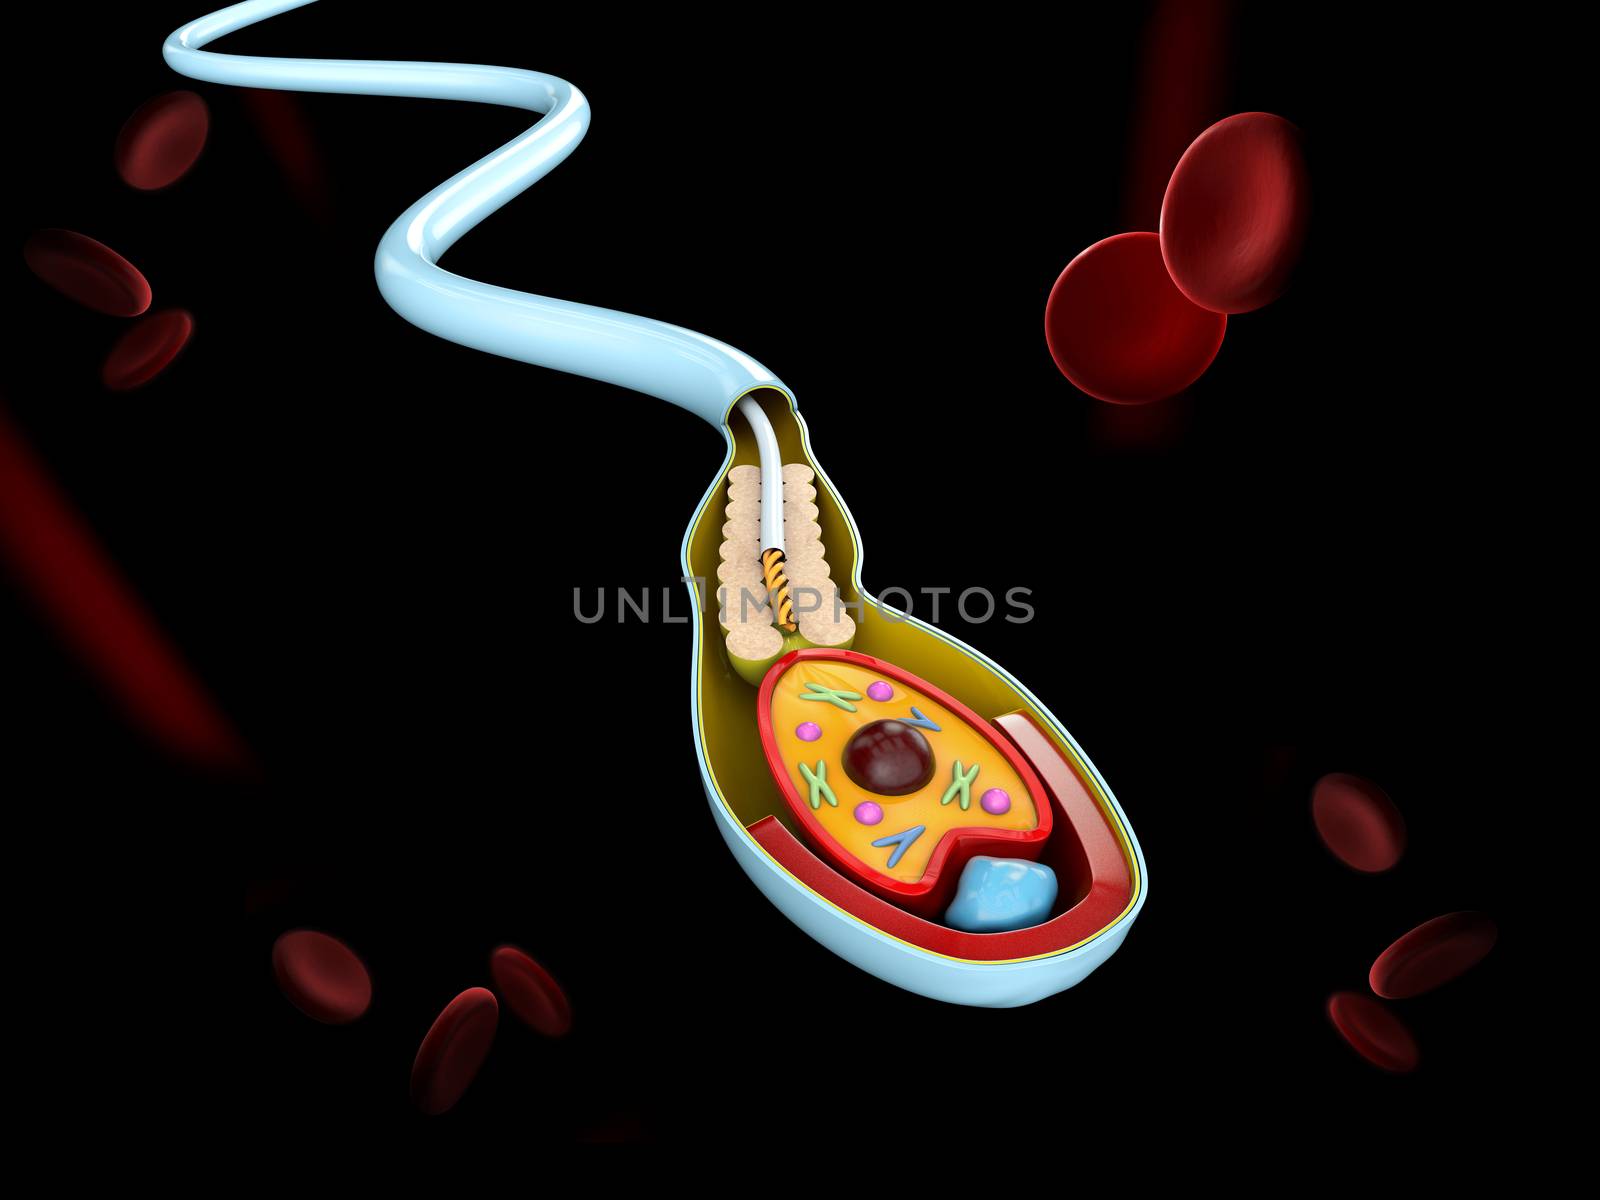 3d Illustration of Human Sperm cell Anatomy structure of spermatozoon by tussik